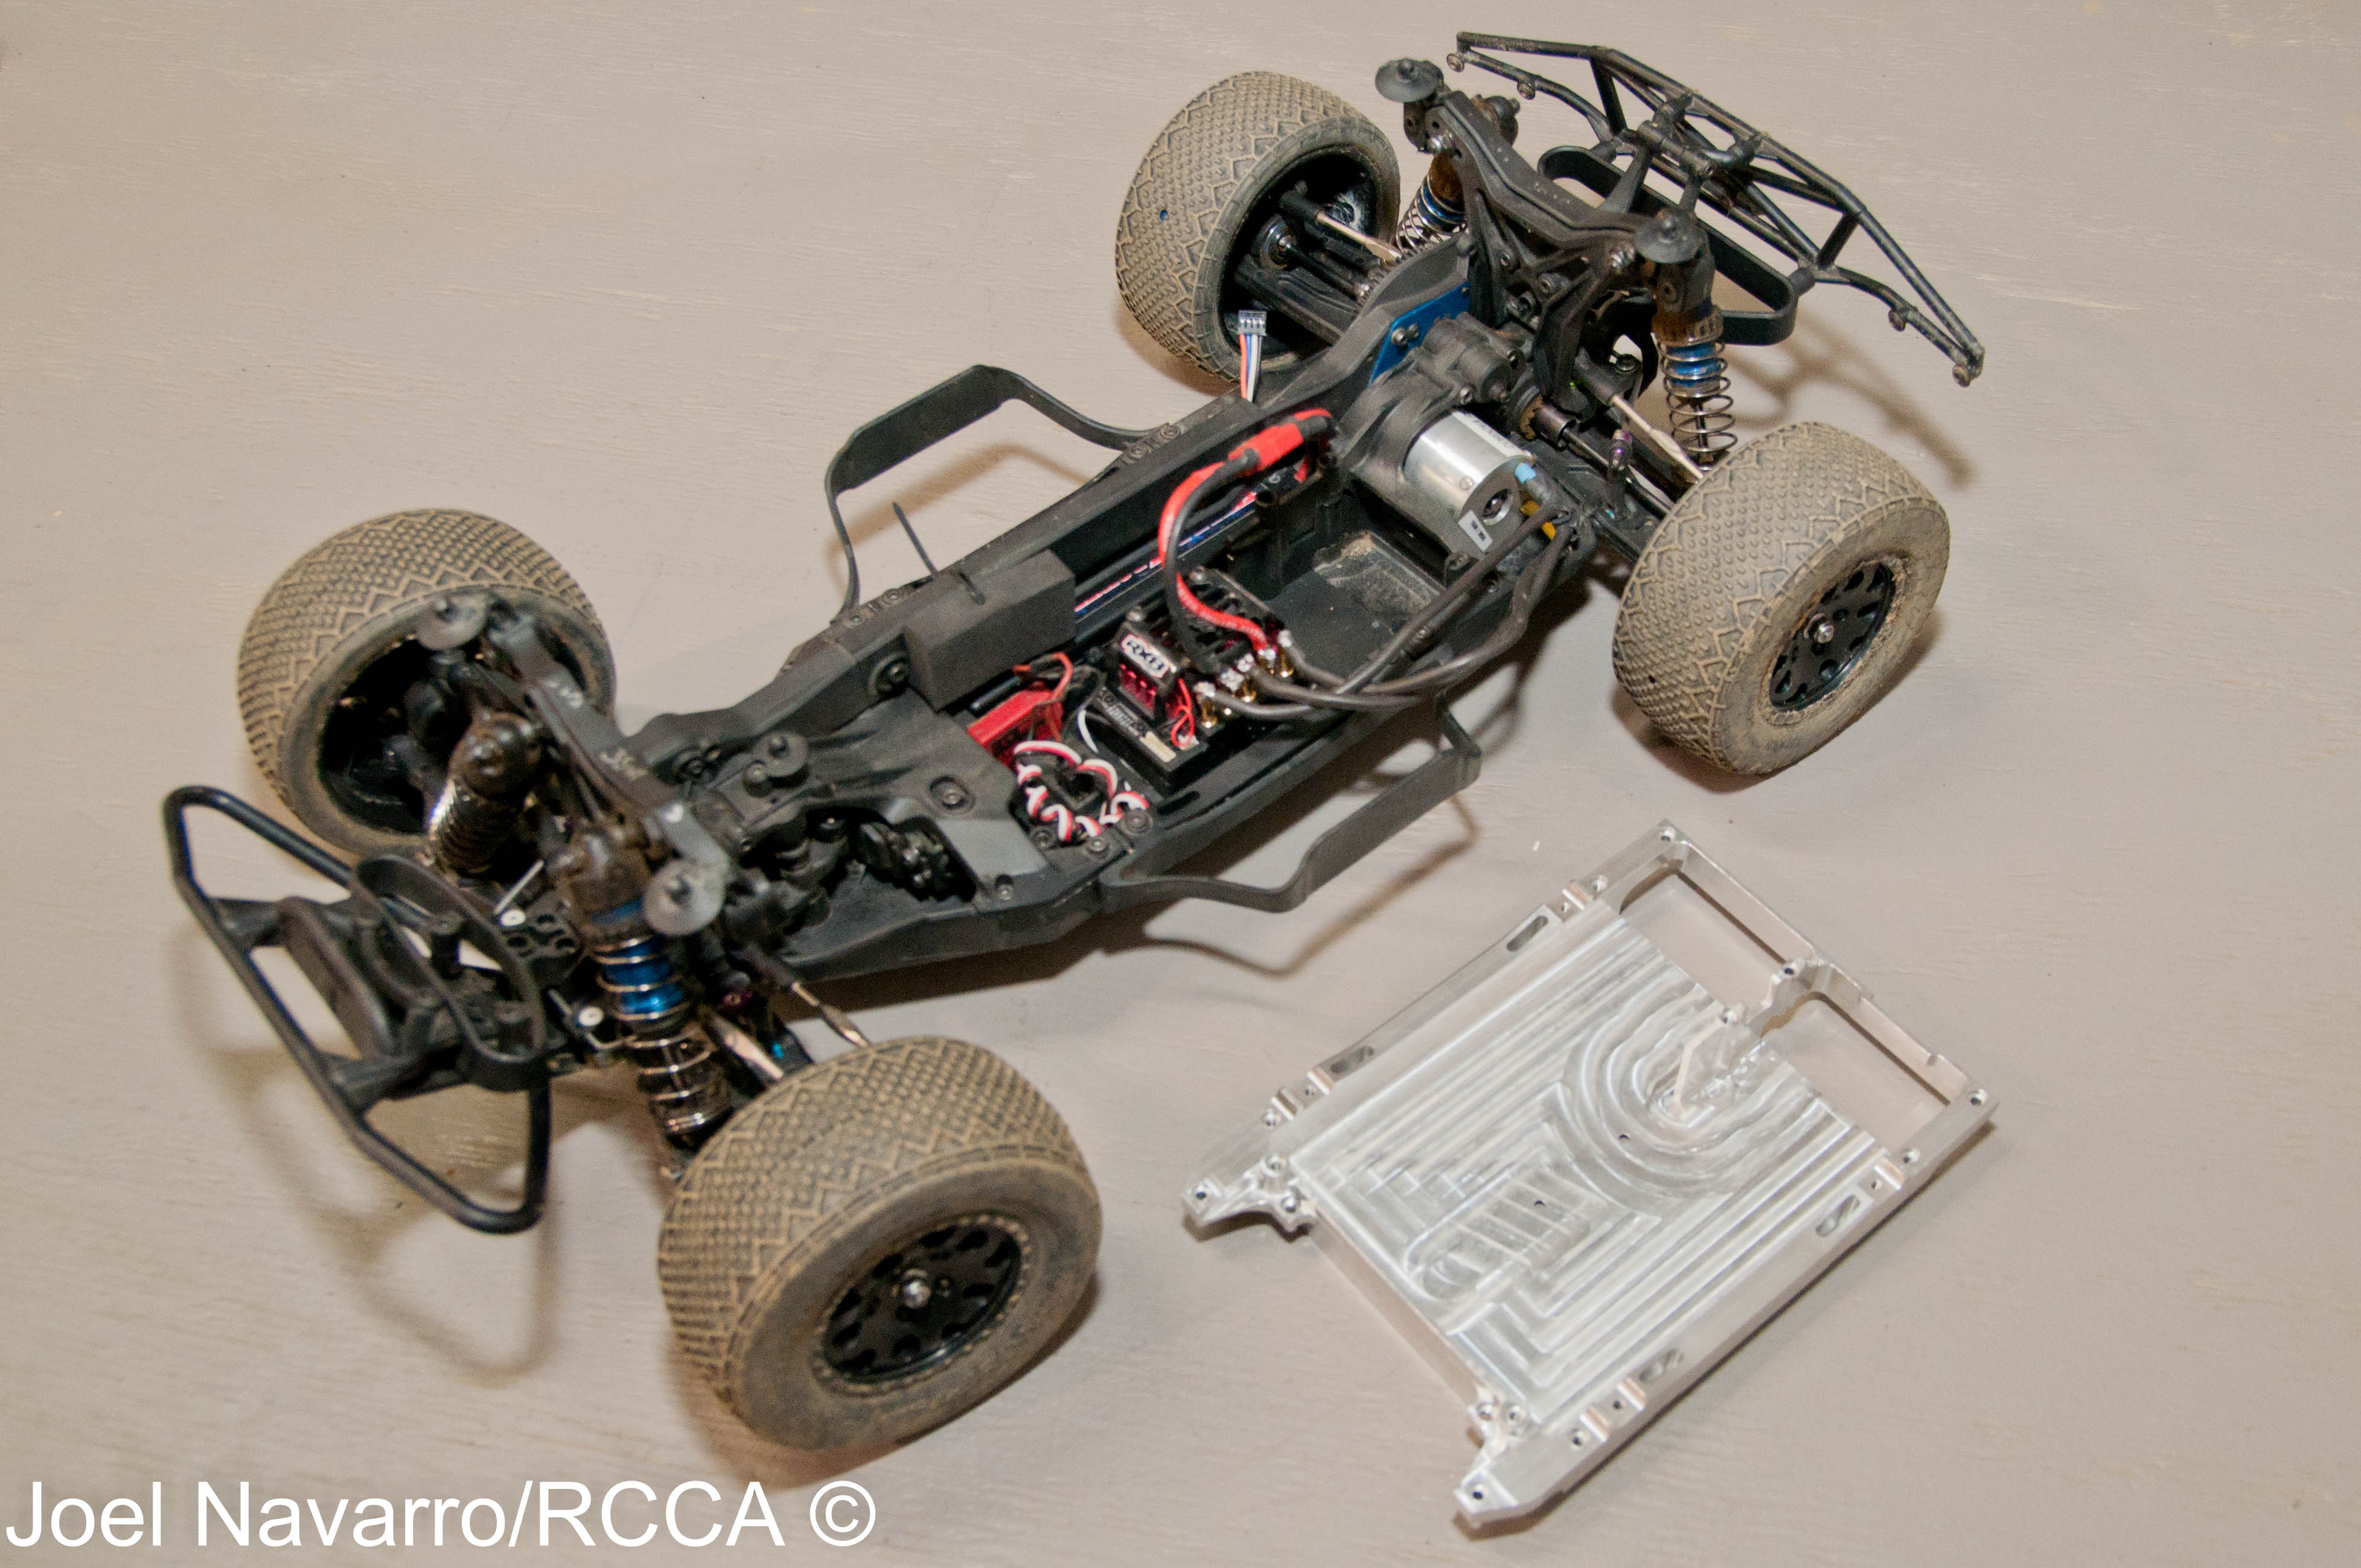 Spy Shots! EXOTEK Aluminum LCG Chassis for the Associated SC10 4X4